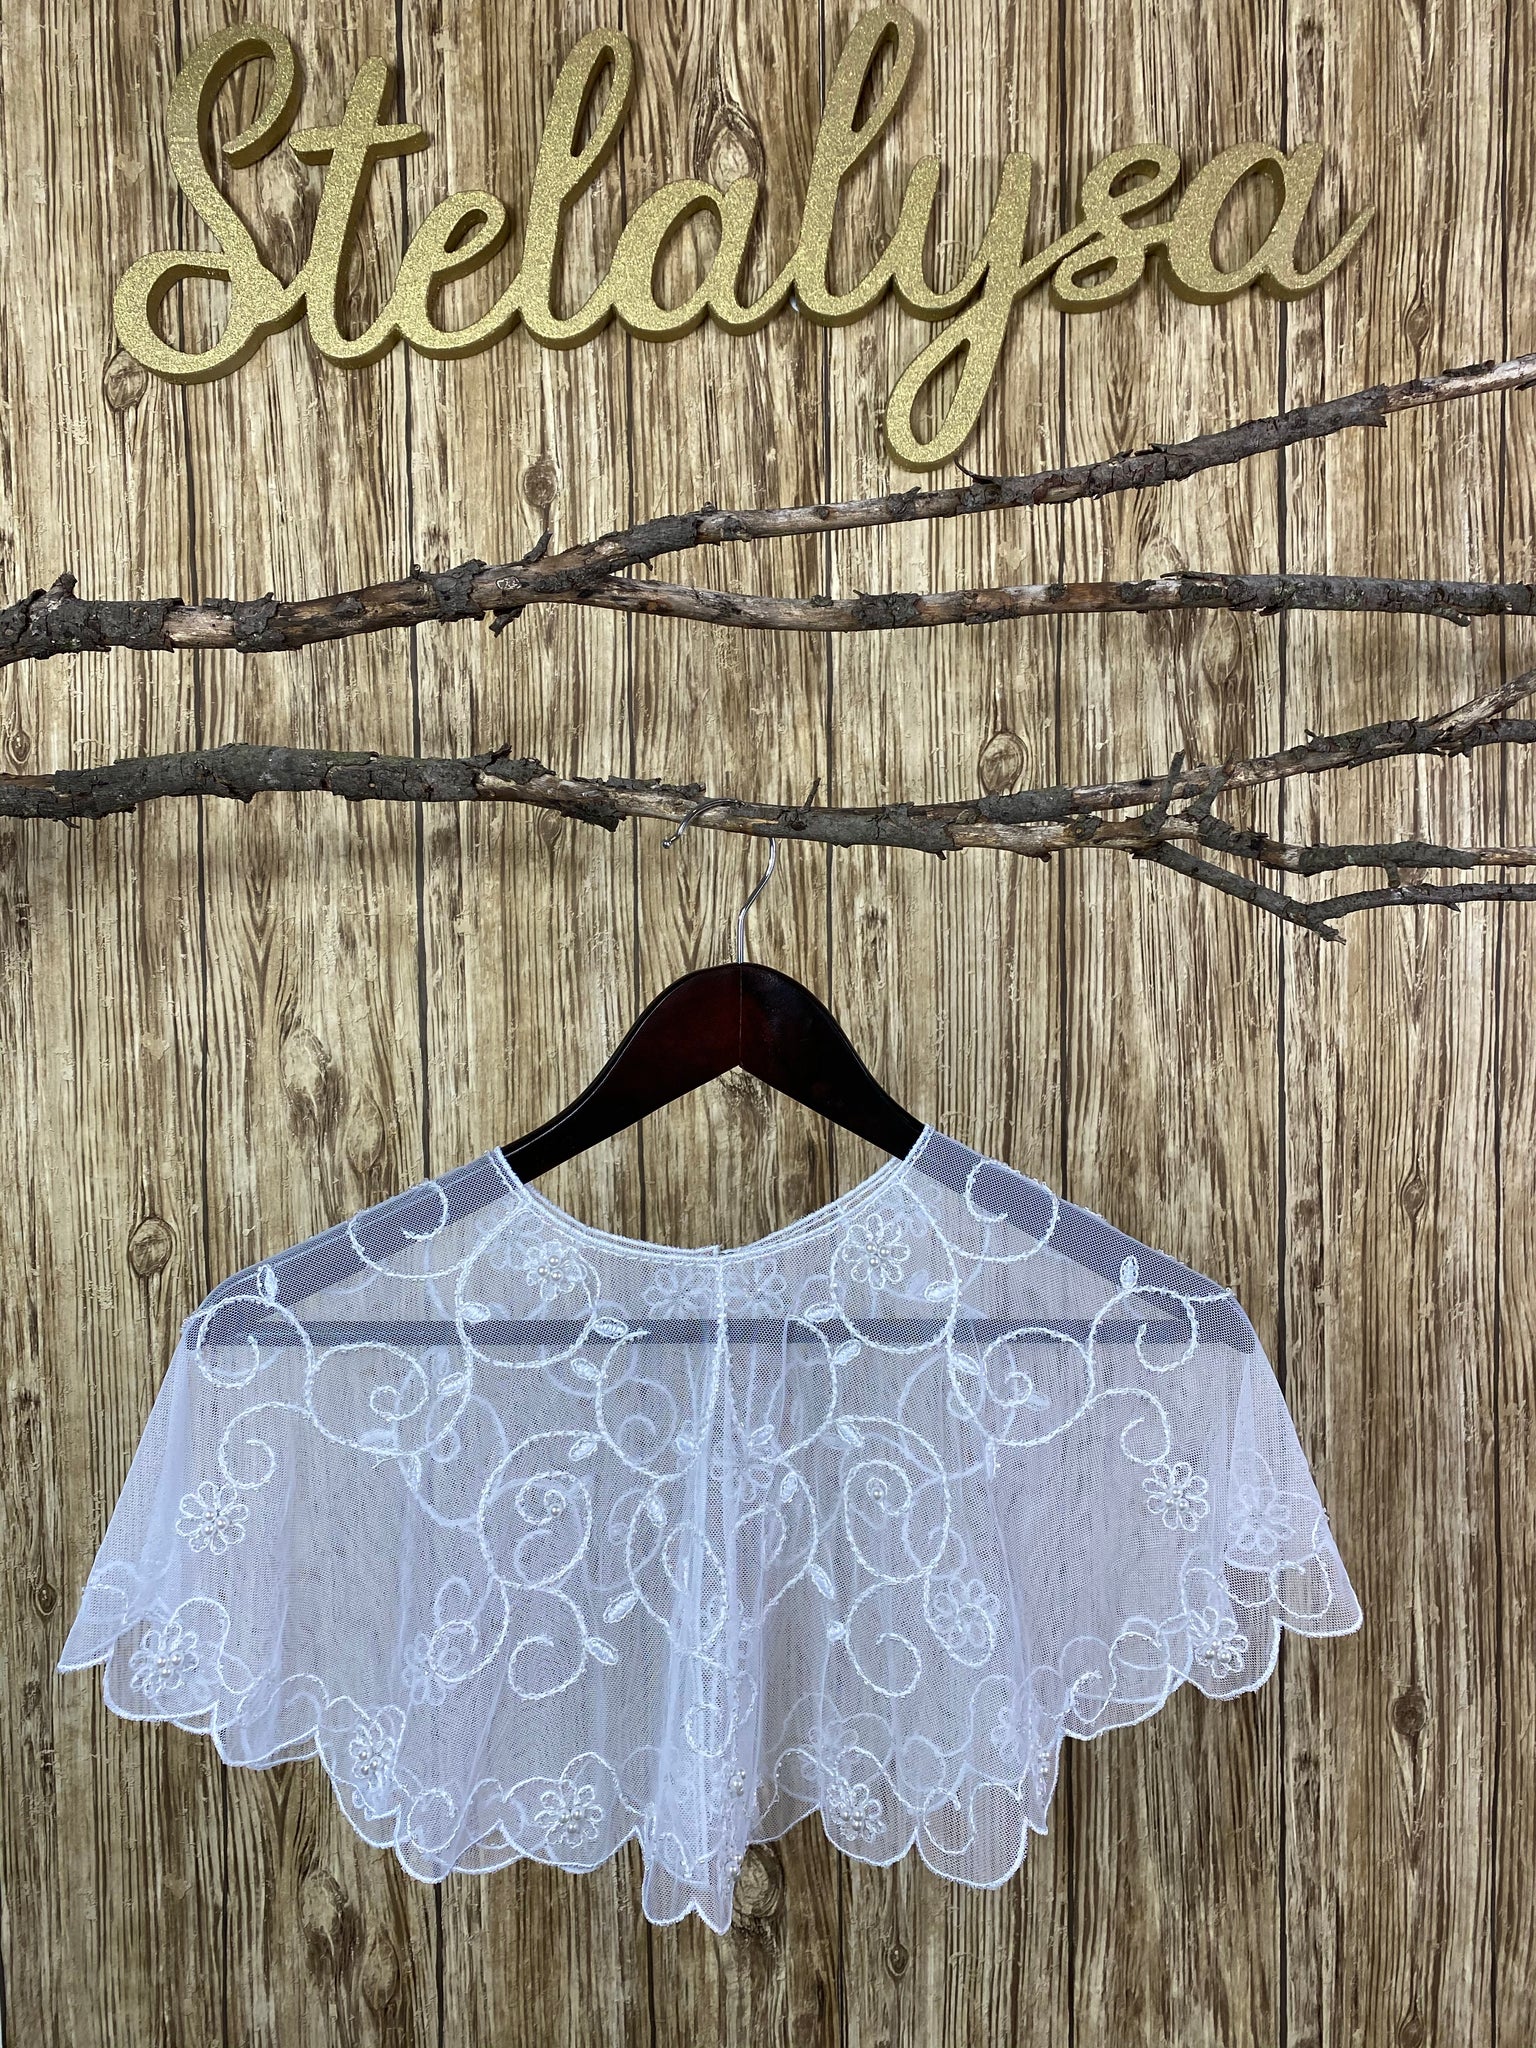 Gorgeous tulle shawl with embroidered flower detailing throughout body, showcasing beautiful pearls in the center.  This shawl can be worn with either a white or ivory communion dress/gown from our collection.  She will look like a princess wearing this elegant shawl on her special day!  